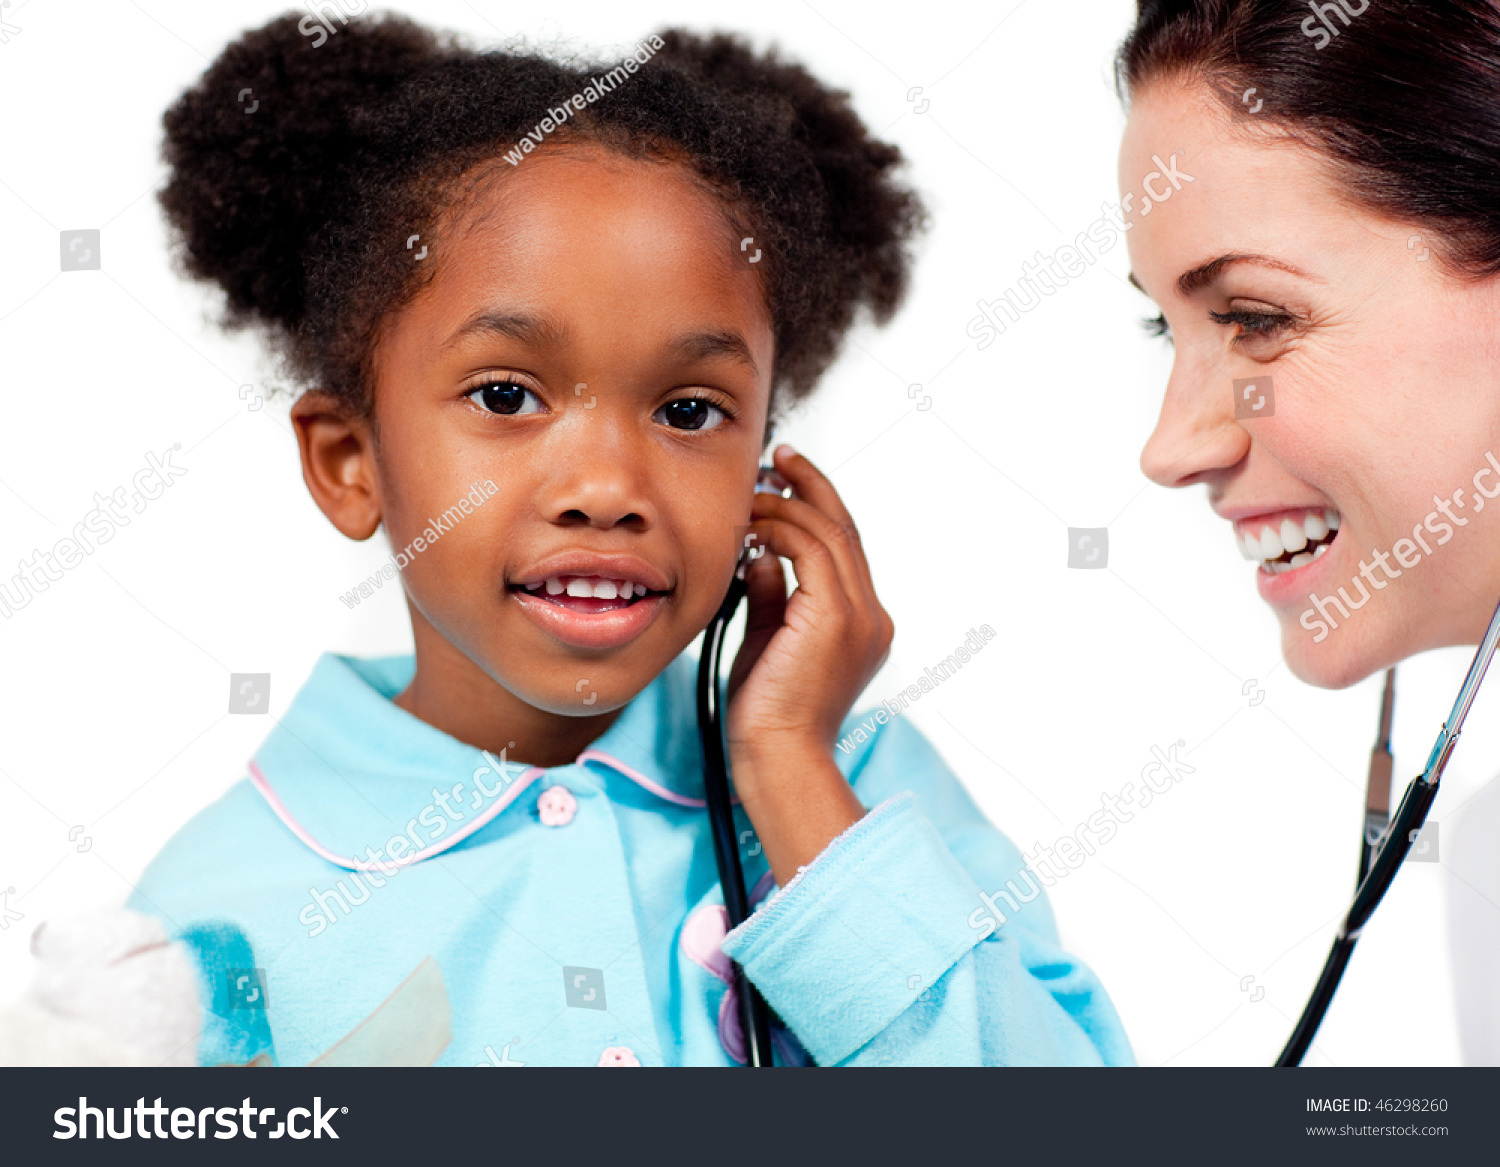 Adorable Little Girl And Her Doctor Playing With A Stethoscope At A